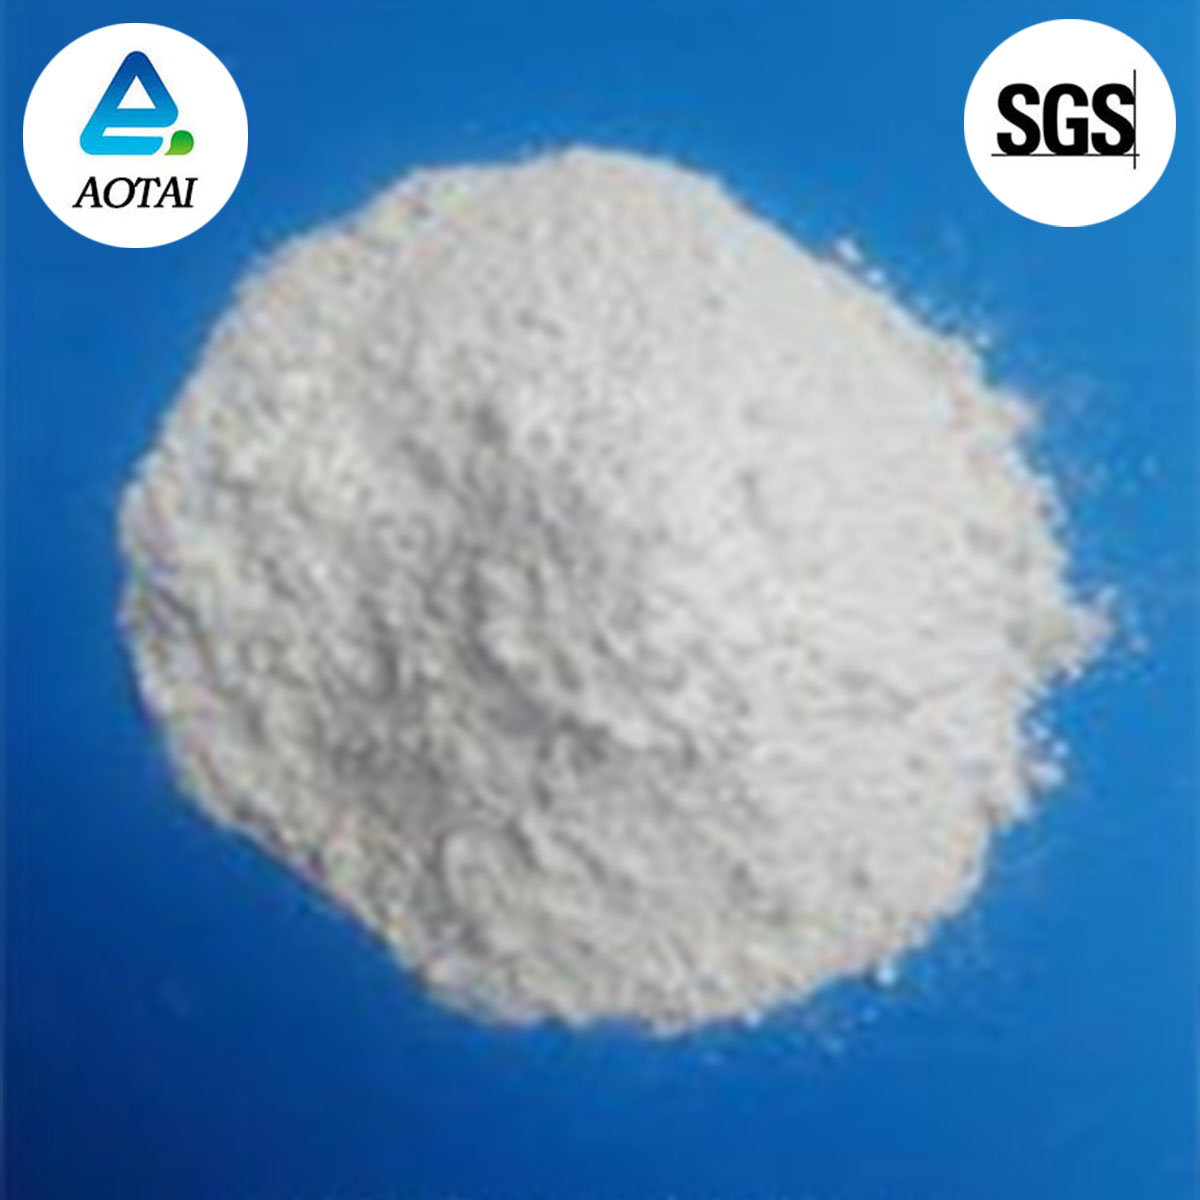 The Application of Alumina in the Industrial Field of Ceramics